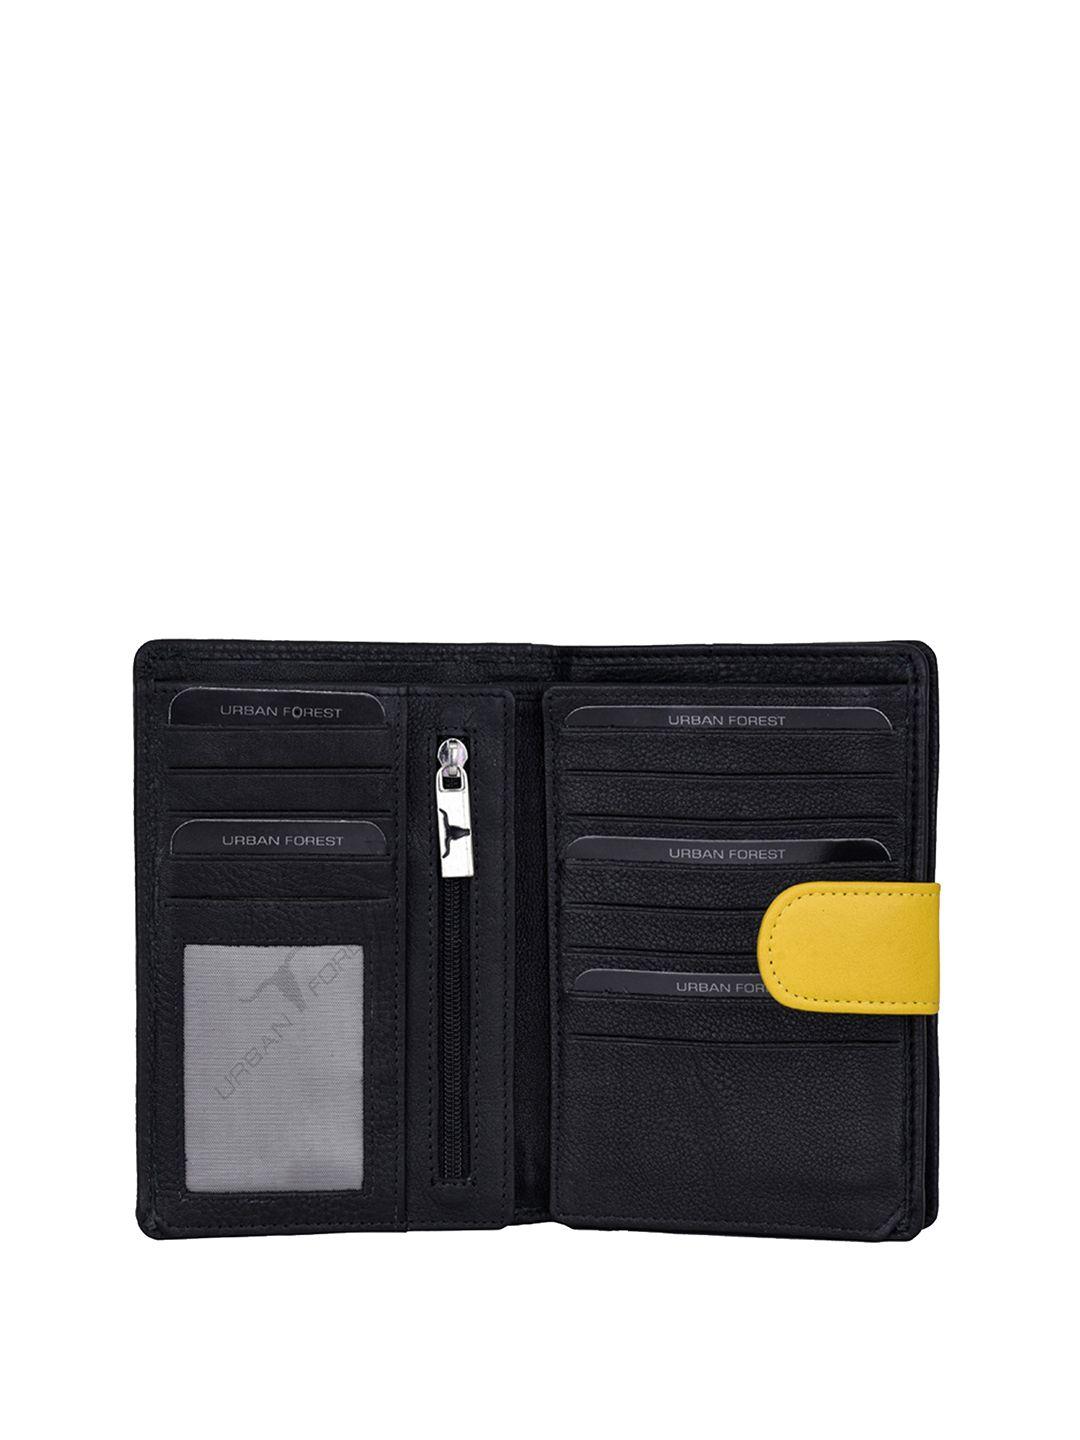 urban forest women leather rfid blocking two fold wallet